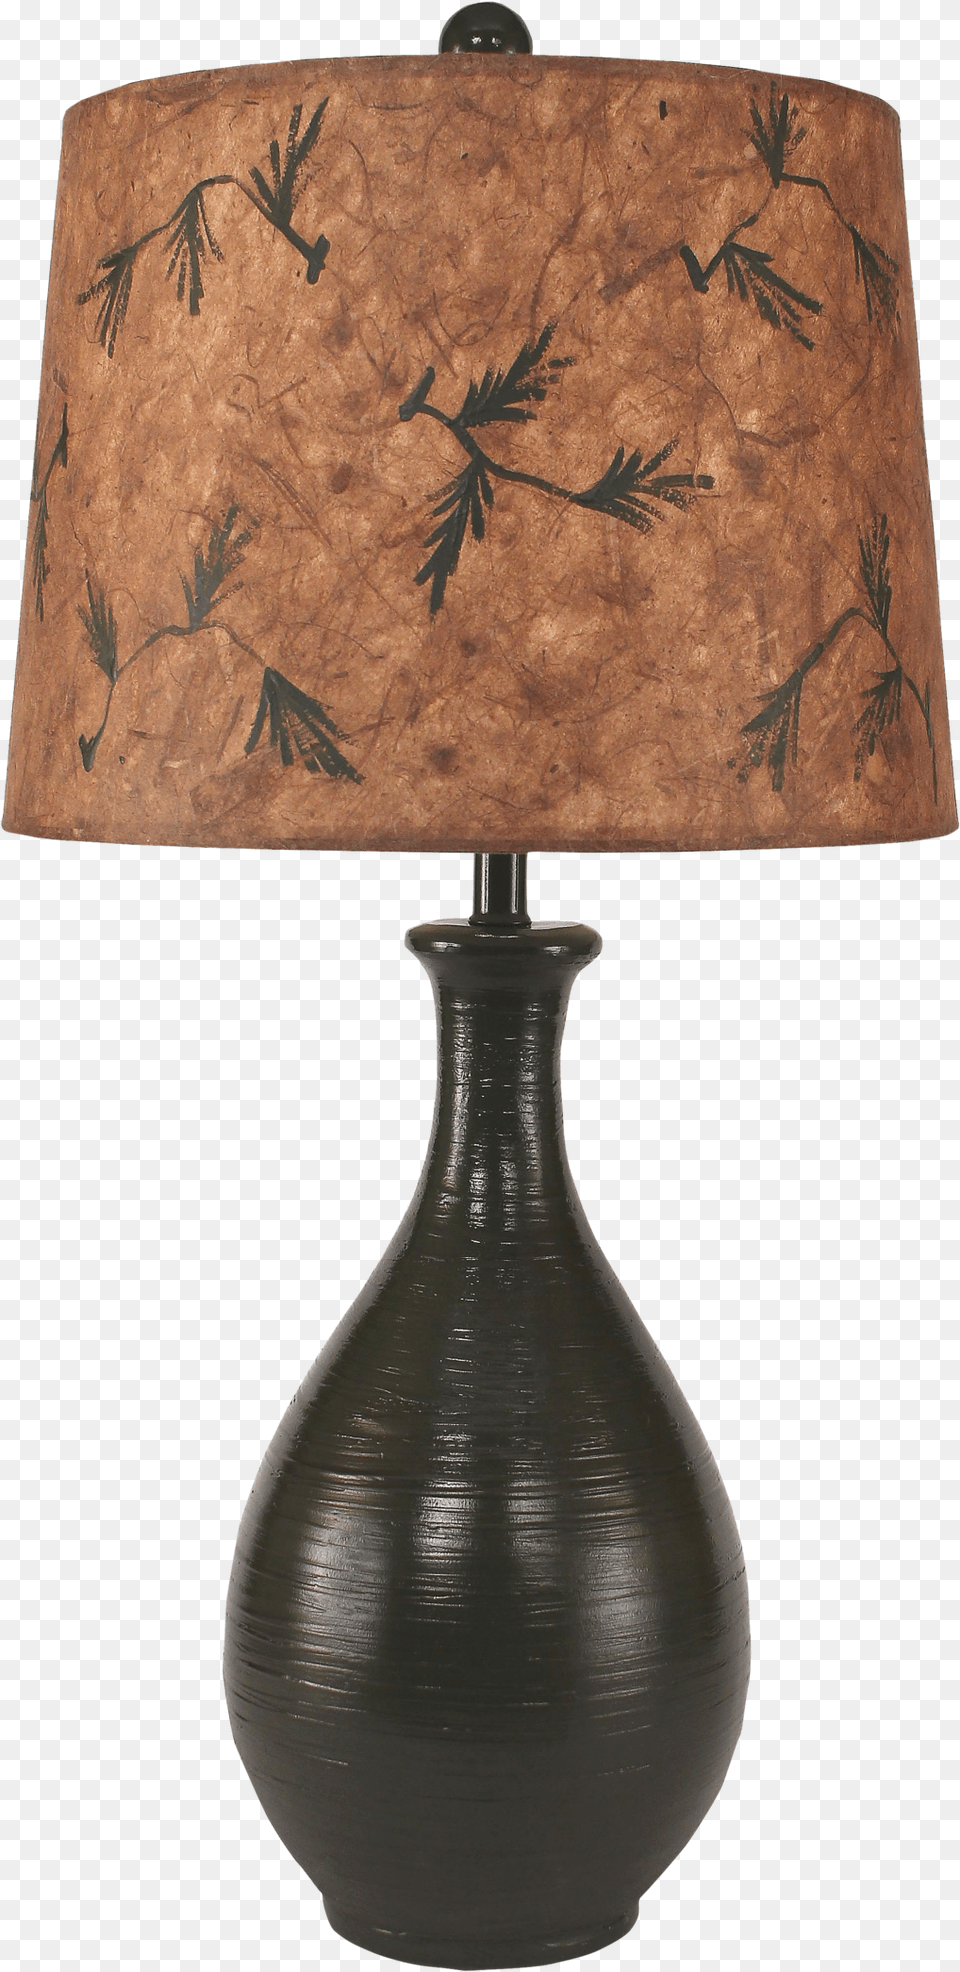 Avacado Ridged Tear Drop Table Lamp W Pine Branch Lampshade, Table Lamp Free Png Download